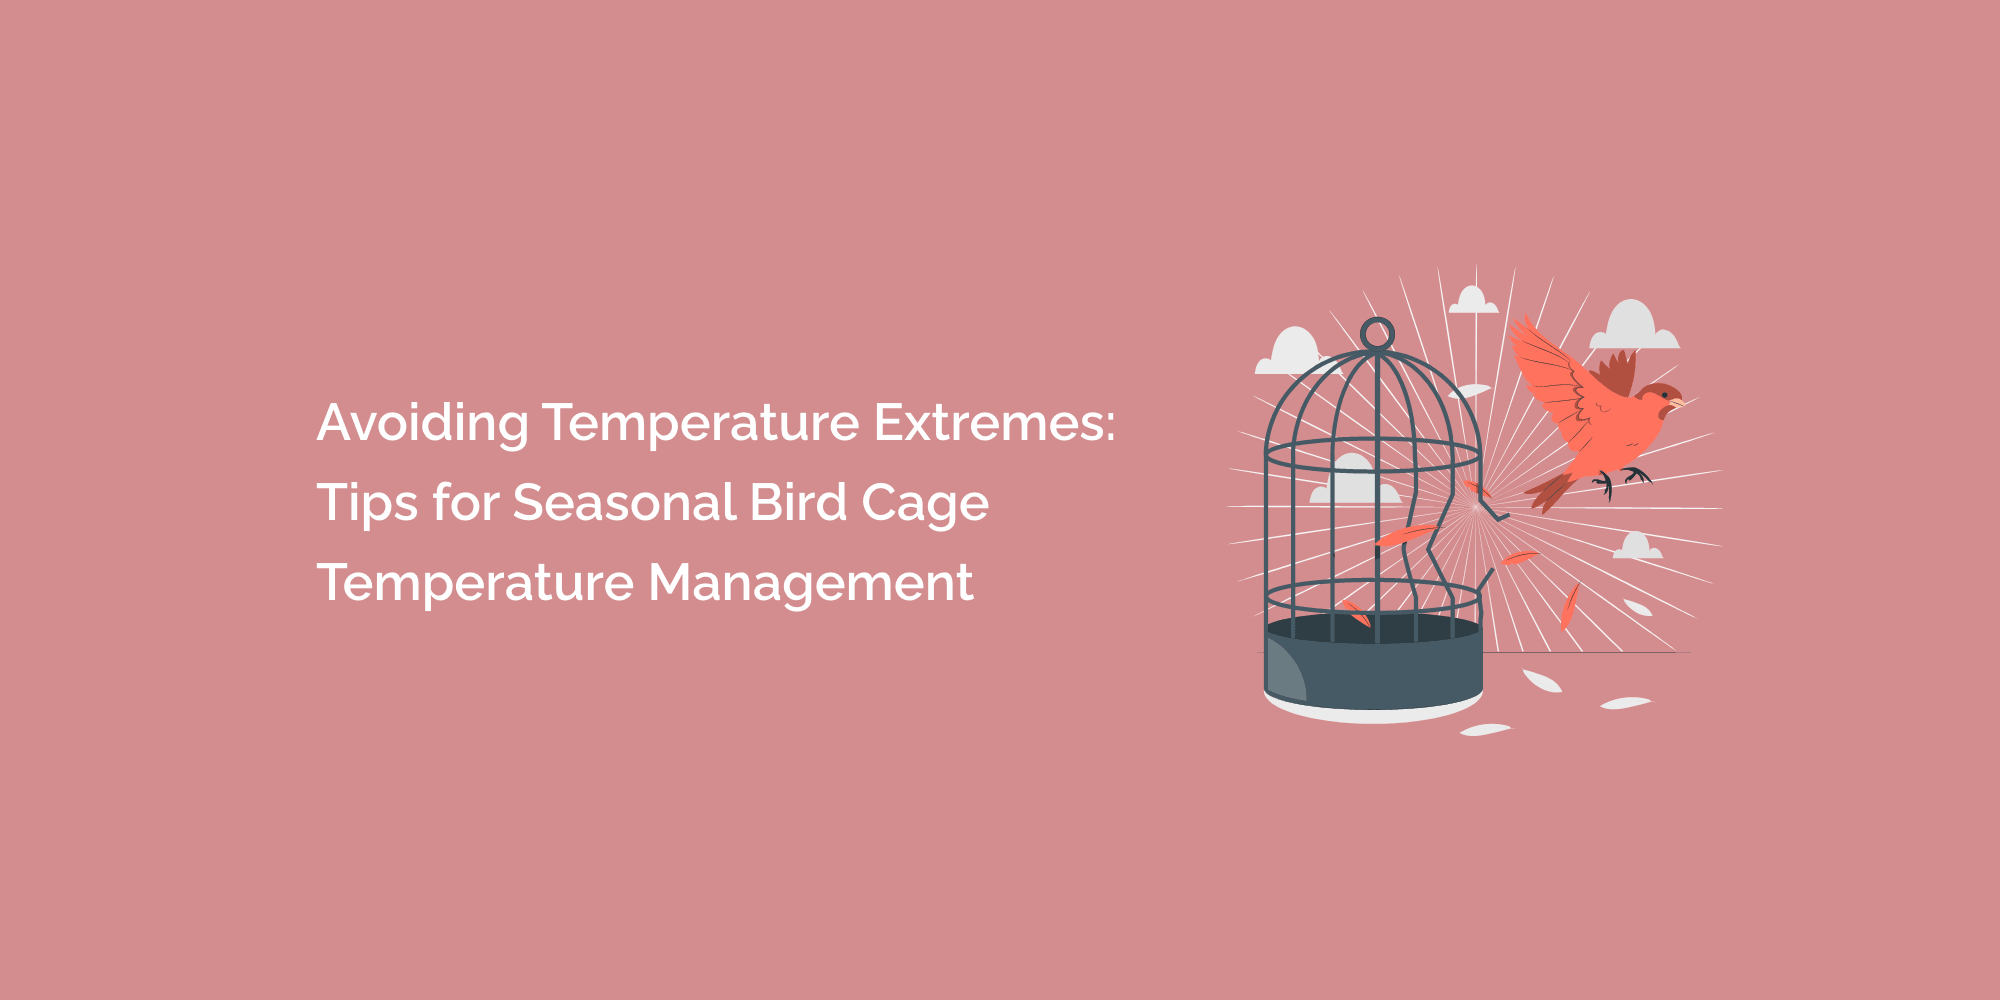 Avoiding Temperature Extremes: Tips for Seasonal Bird Cage Temperature Management